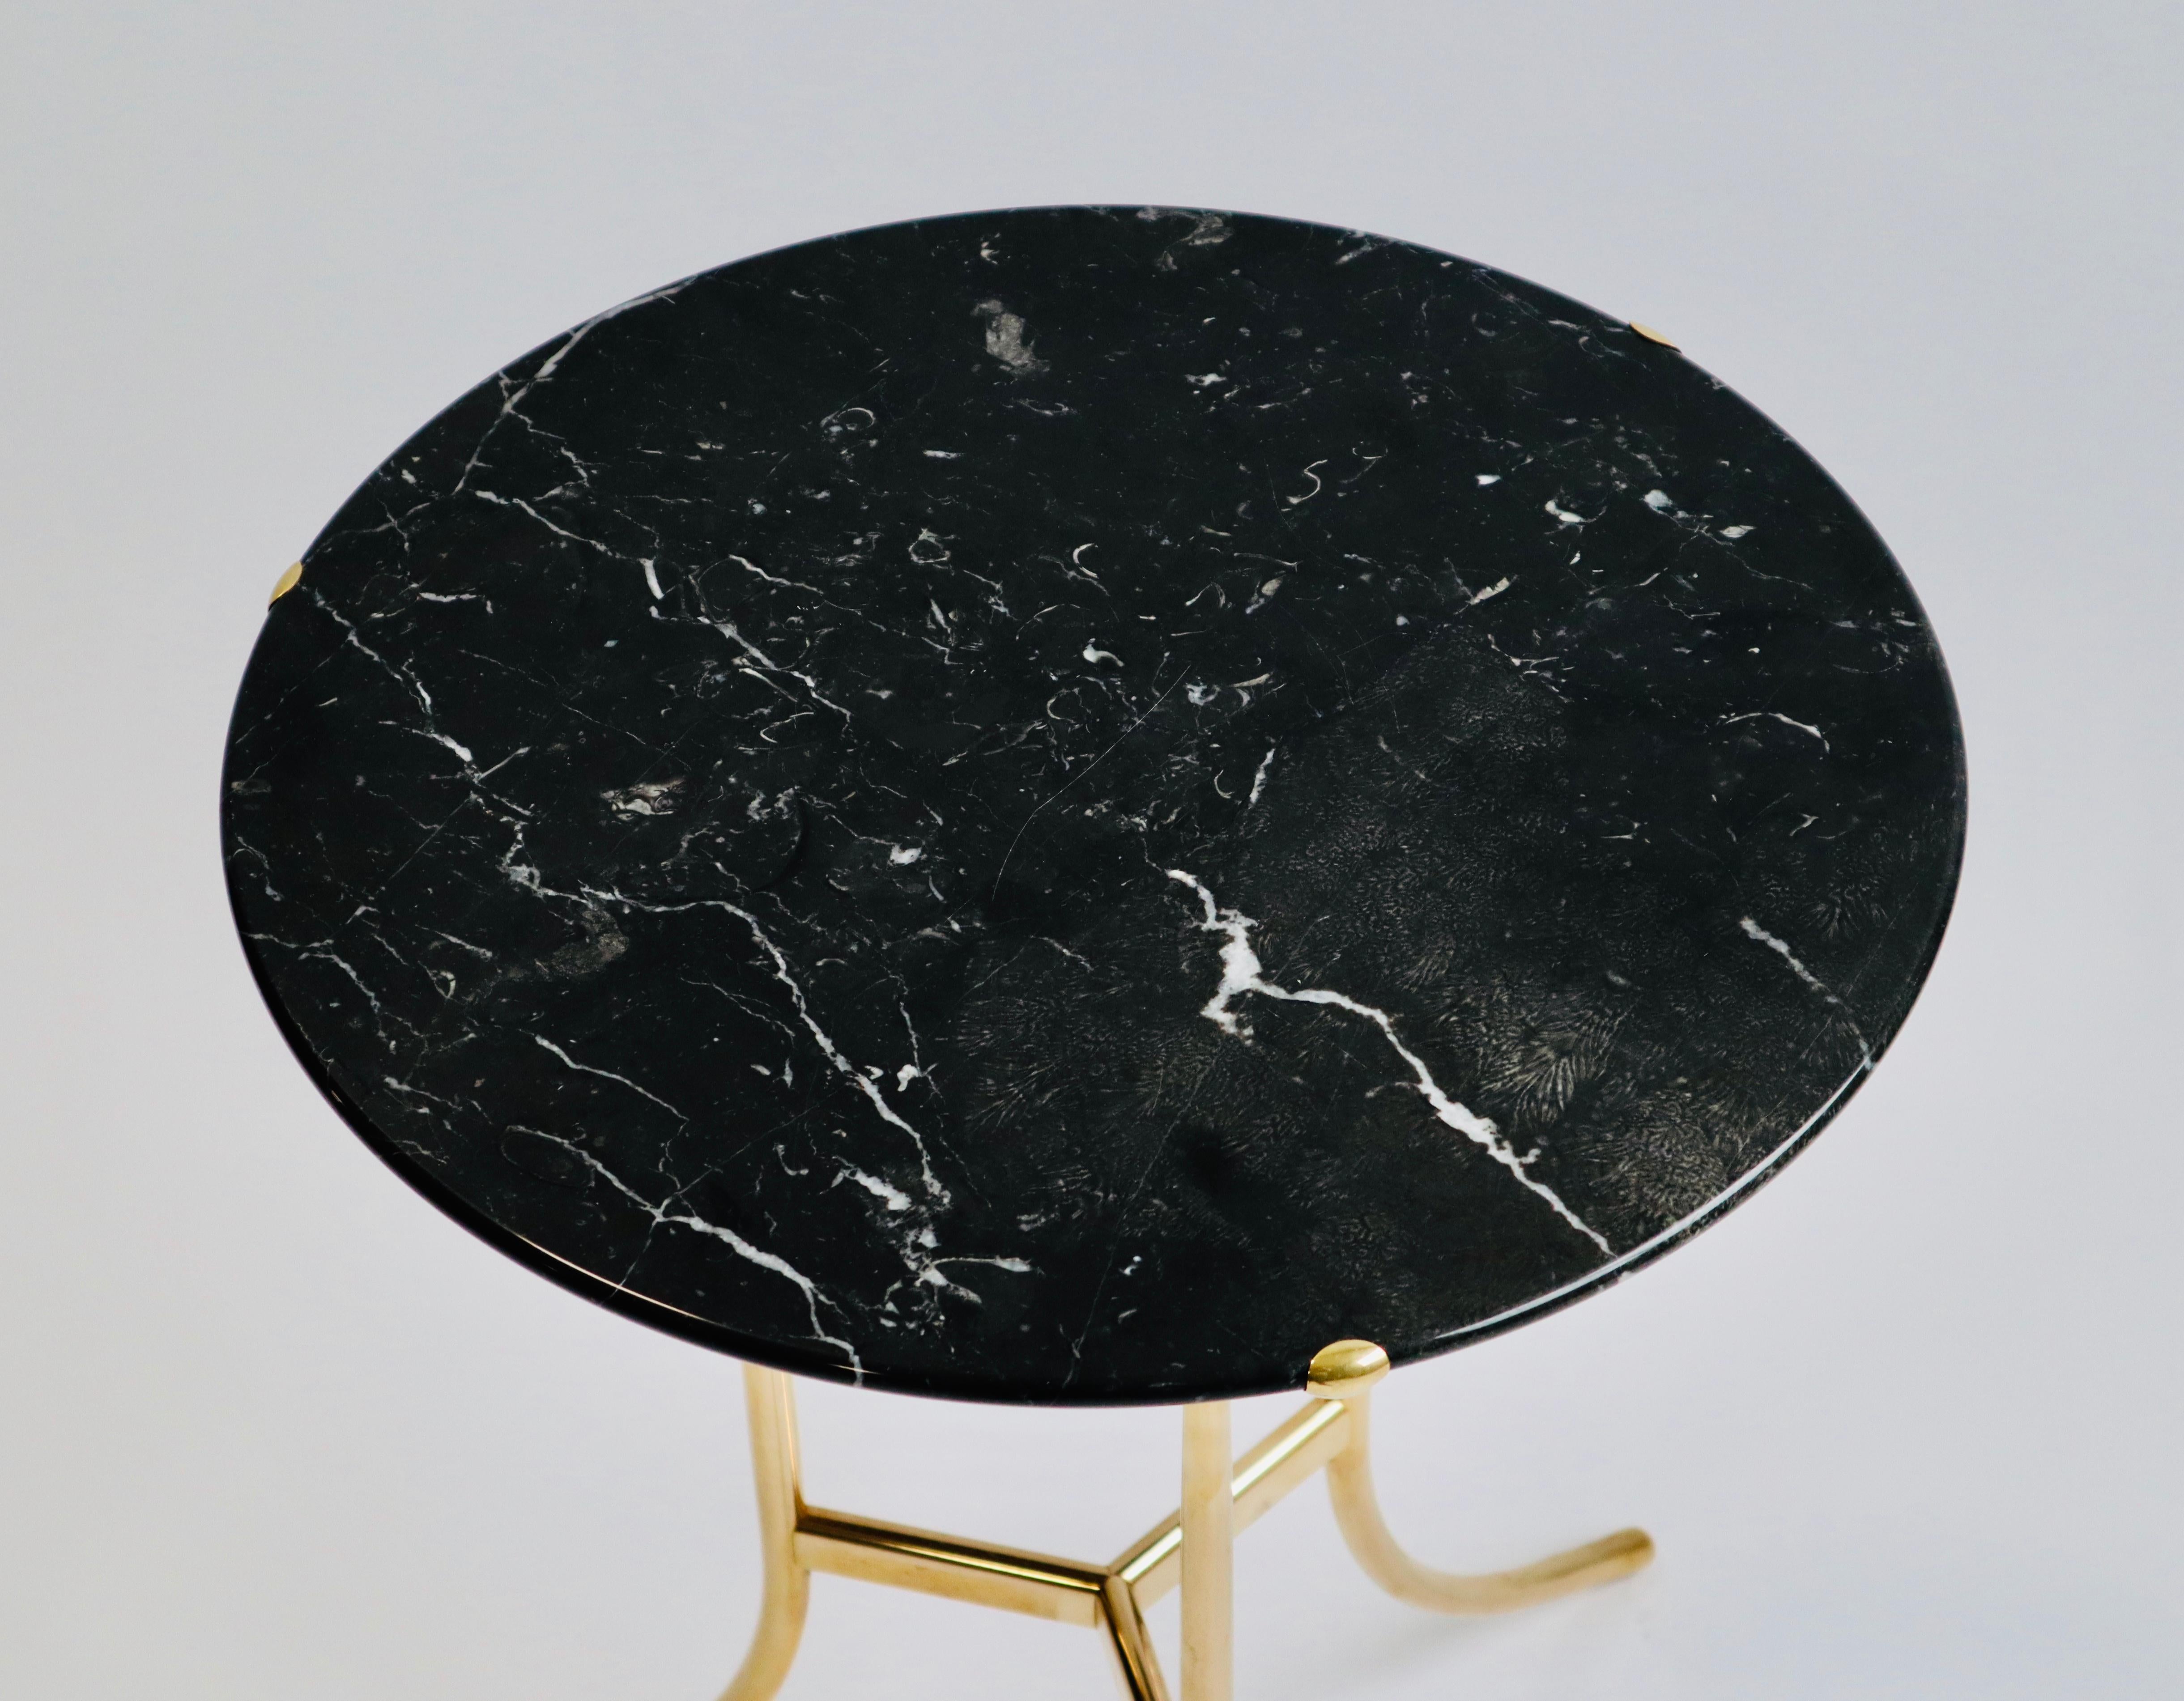 Side table designed by Cedric Hartman, signed and numbered. Brass frame with black marble top.